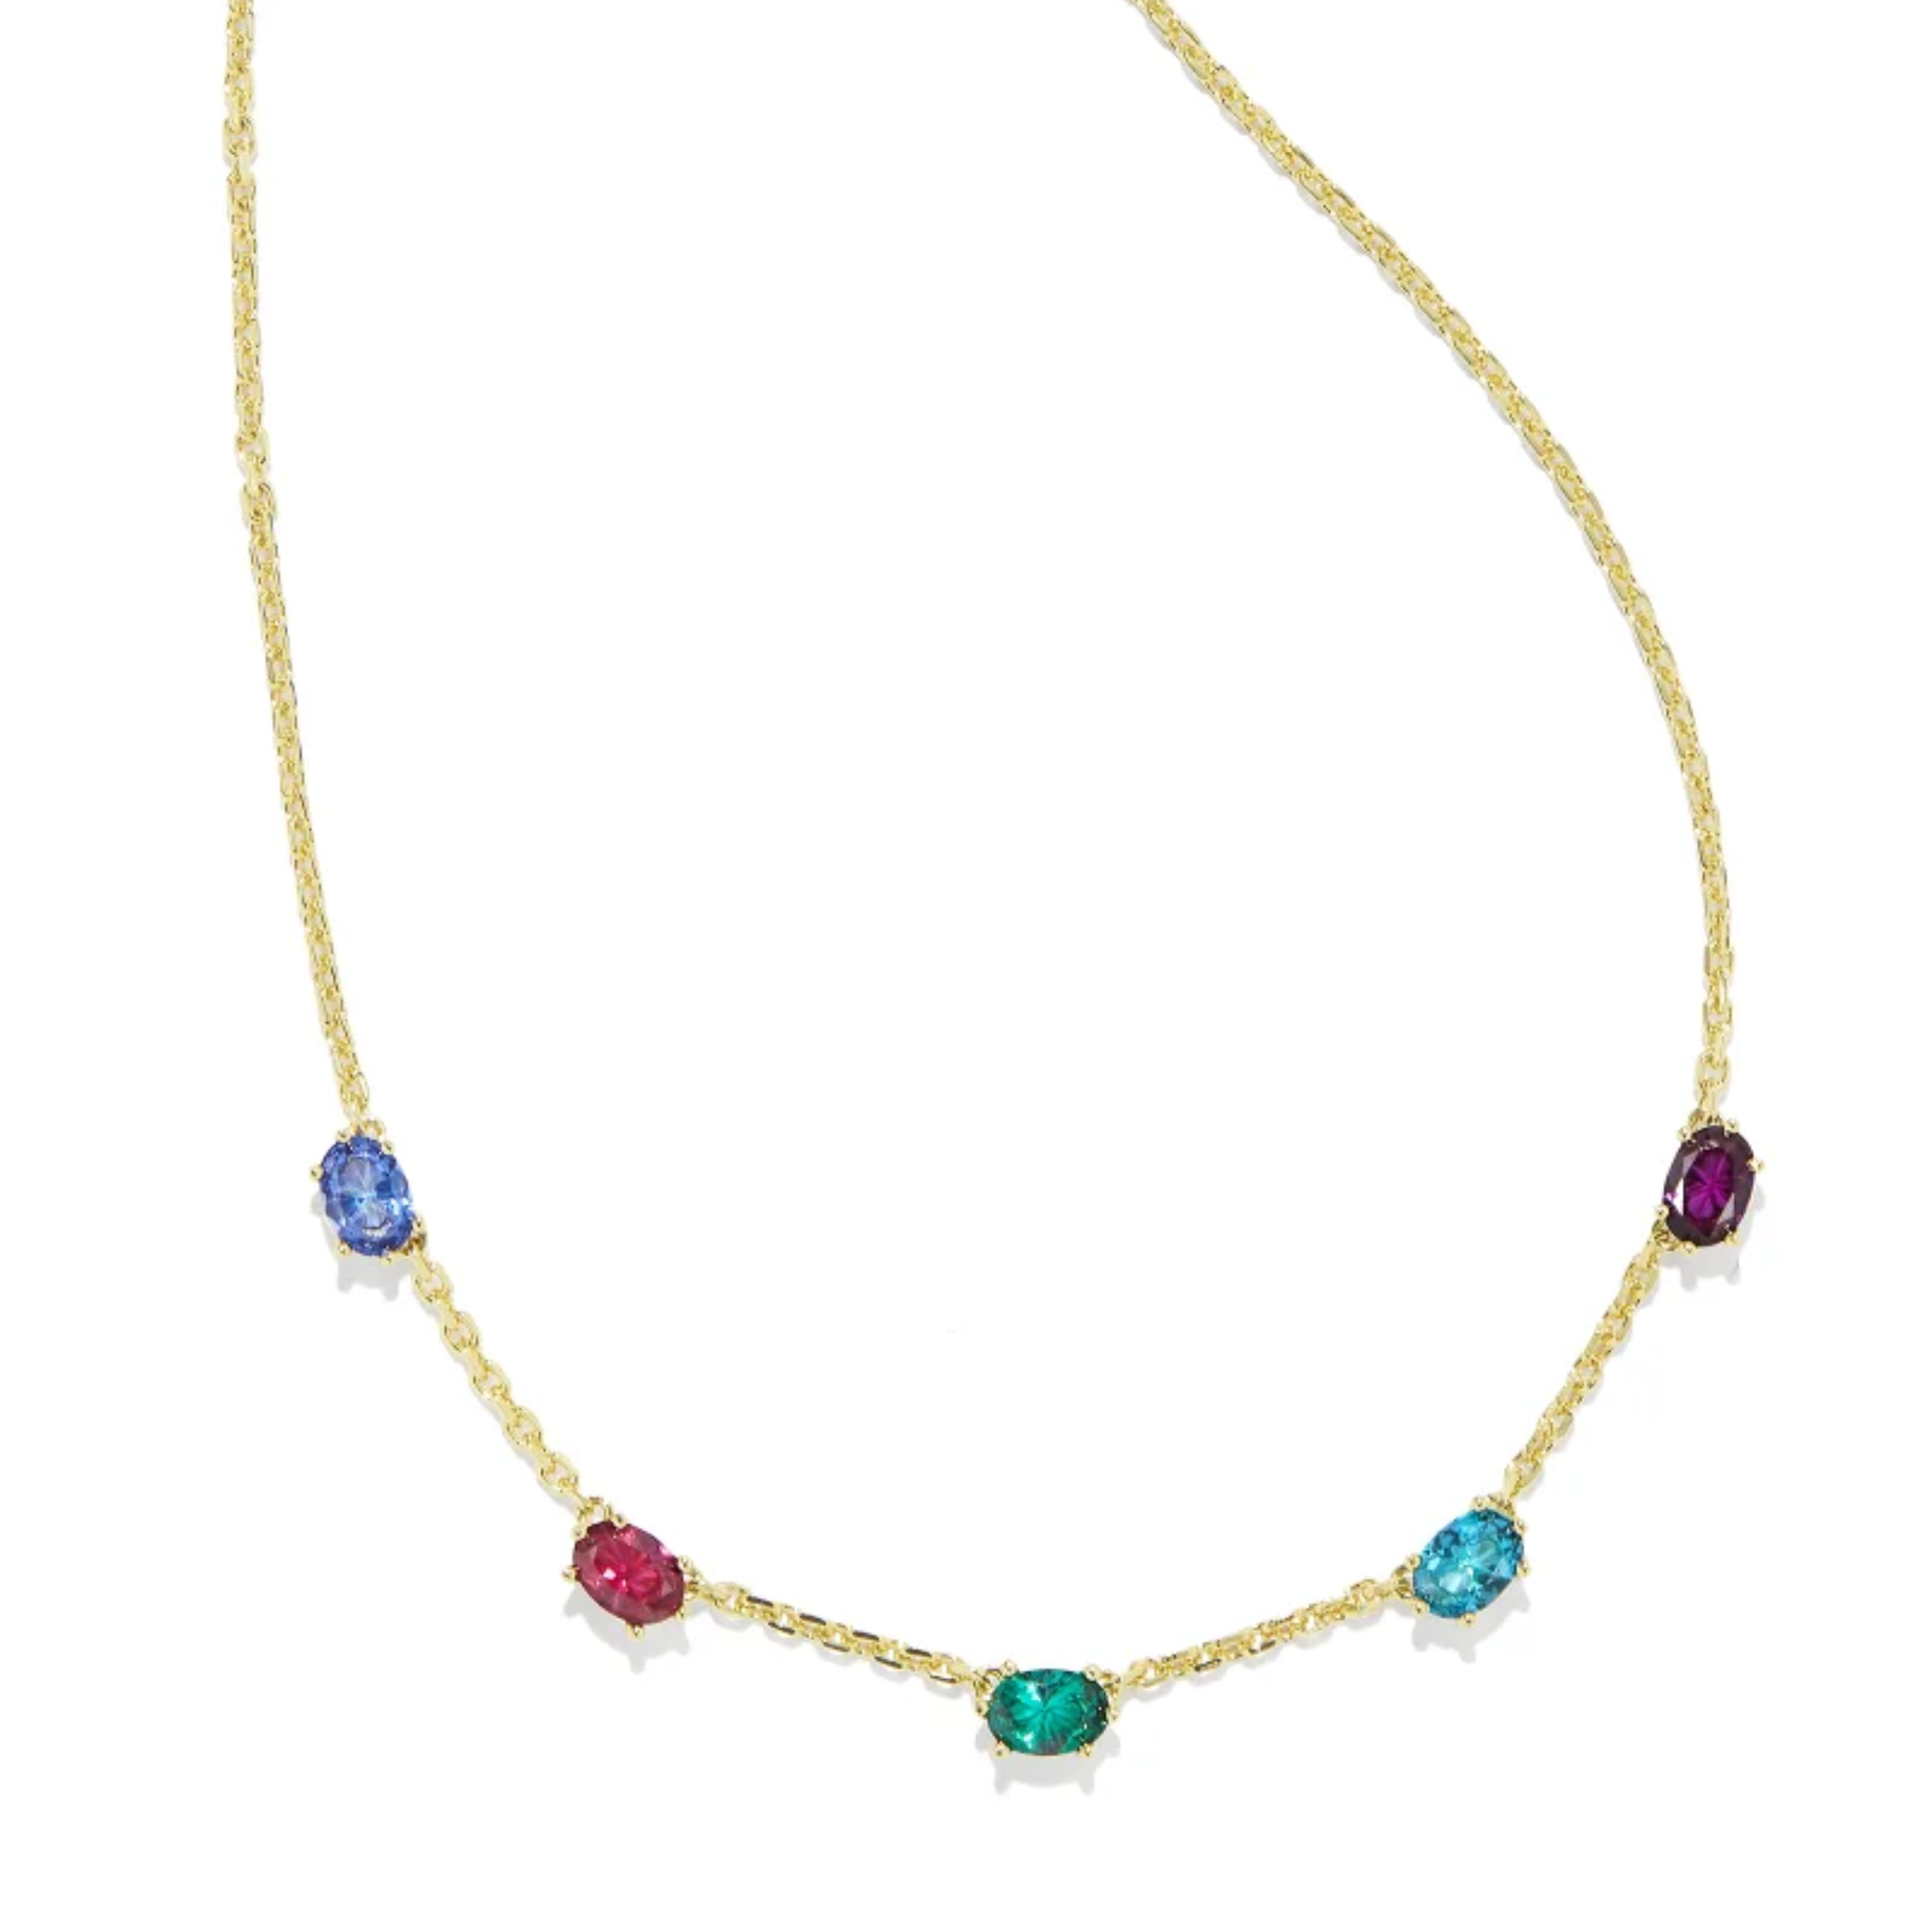 This Cailin Cold Crystal Strand Necklace in Multi Mix by Kendra Scott i pictured on a white background.